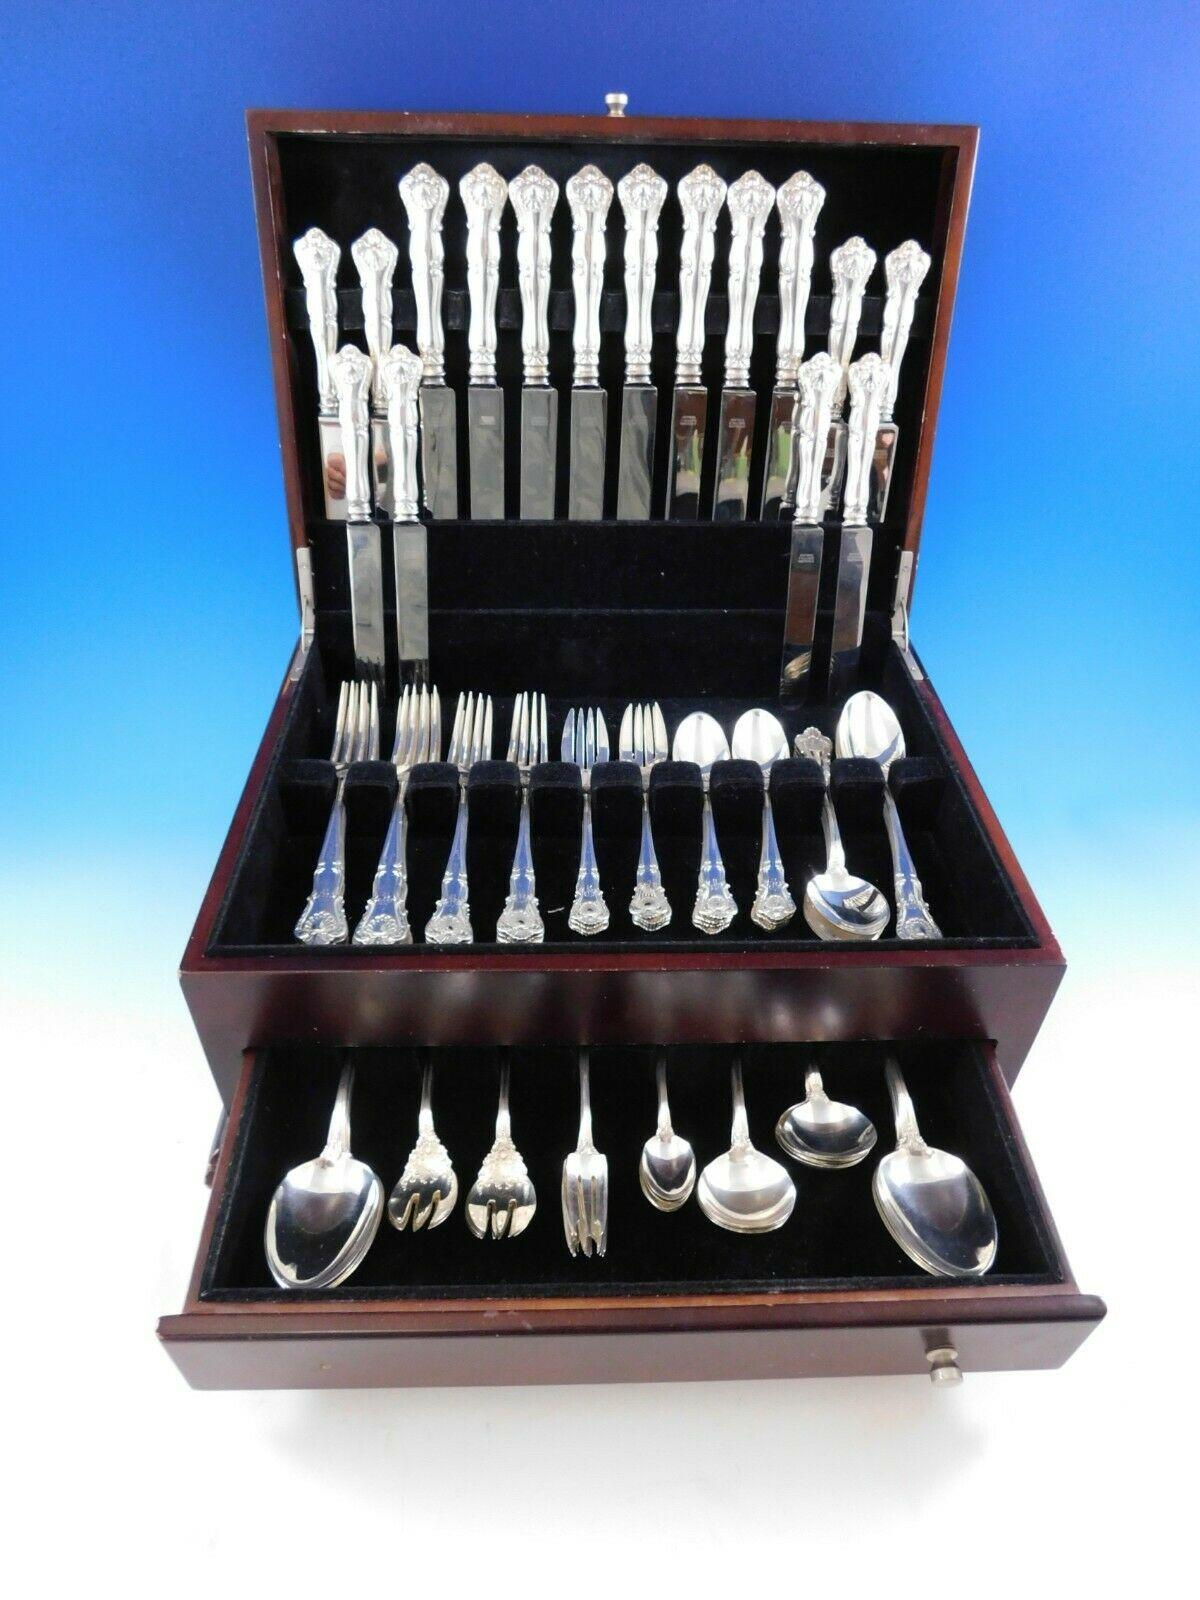 Exceptional New Queens by Durgin sterling silver dinner flatware set, 96 pieces. This shell motif pattern was introduced in the year 1900. This set includes:

8 dinner size knives, 9 3/4